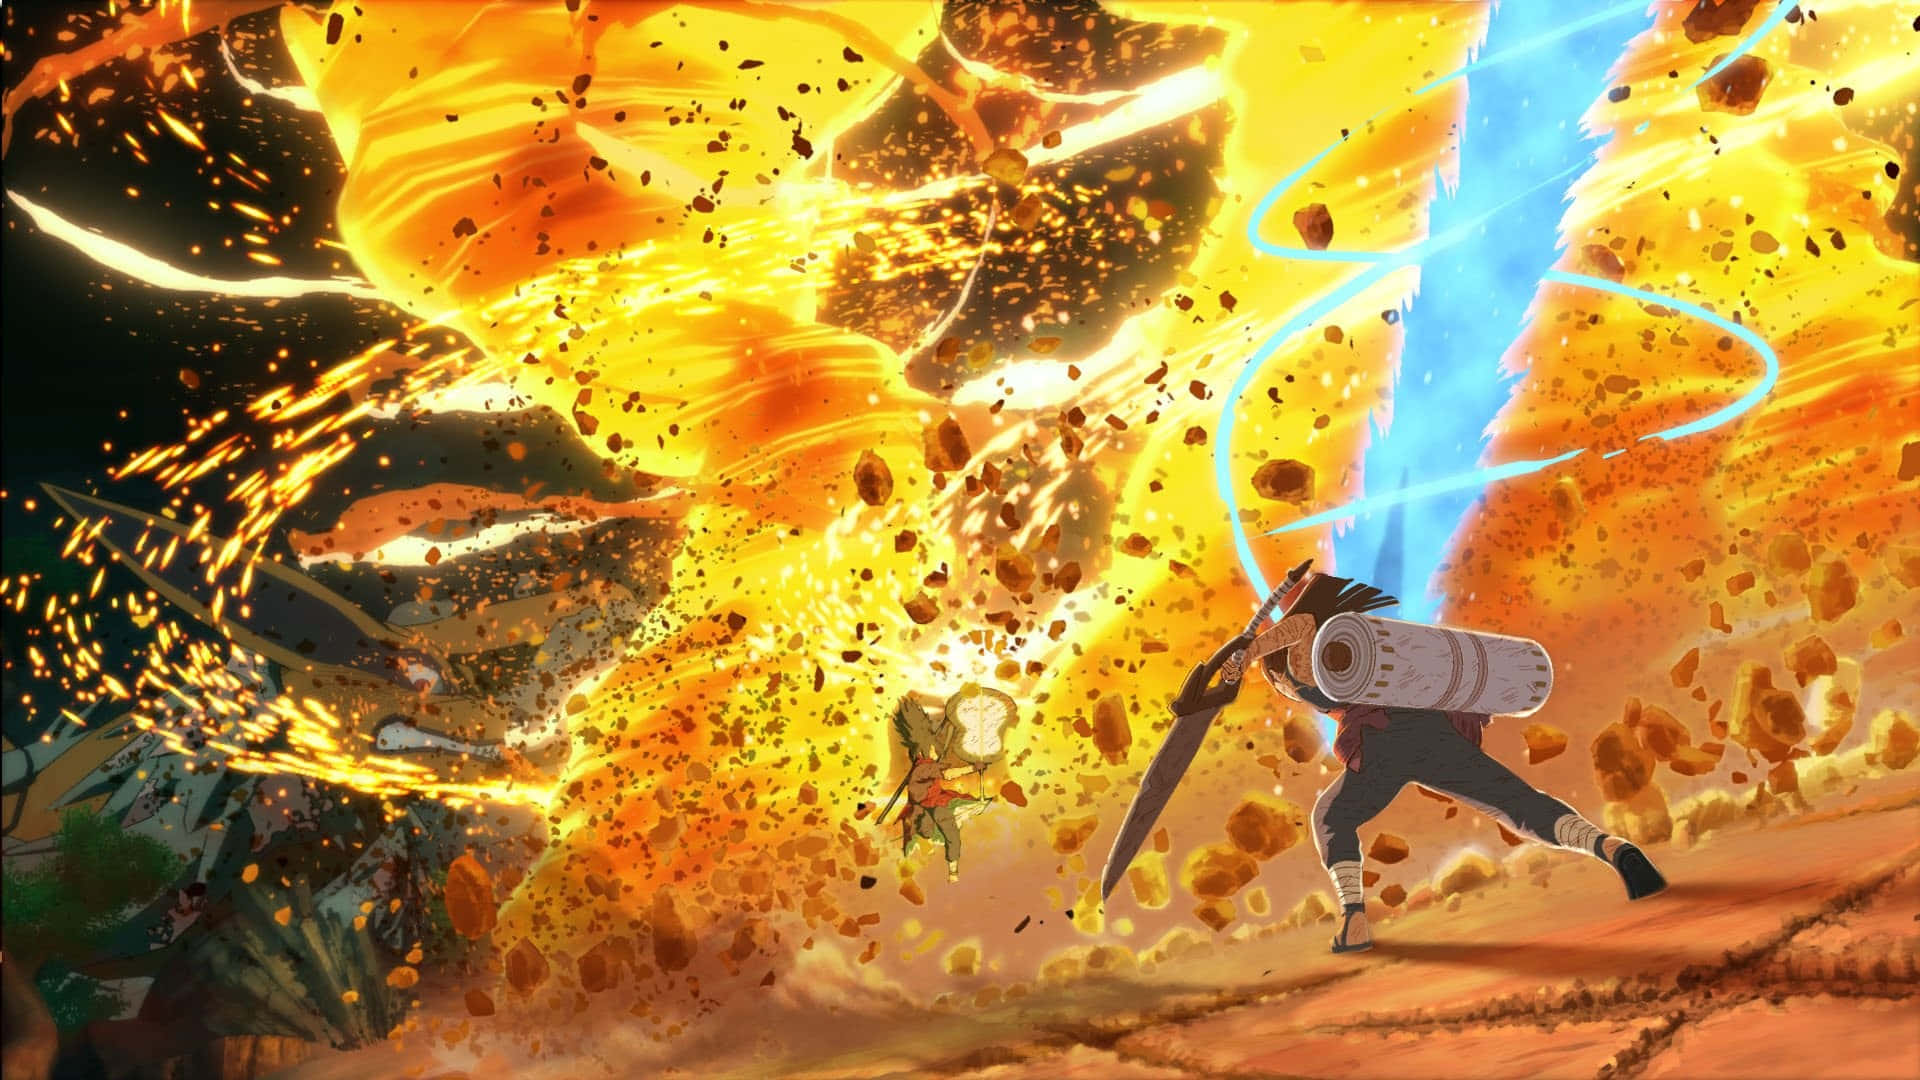 Anime Fight Background Images HD Pictures and Wallpaper For Free Download   Pngtree